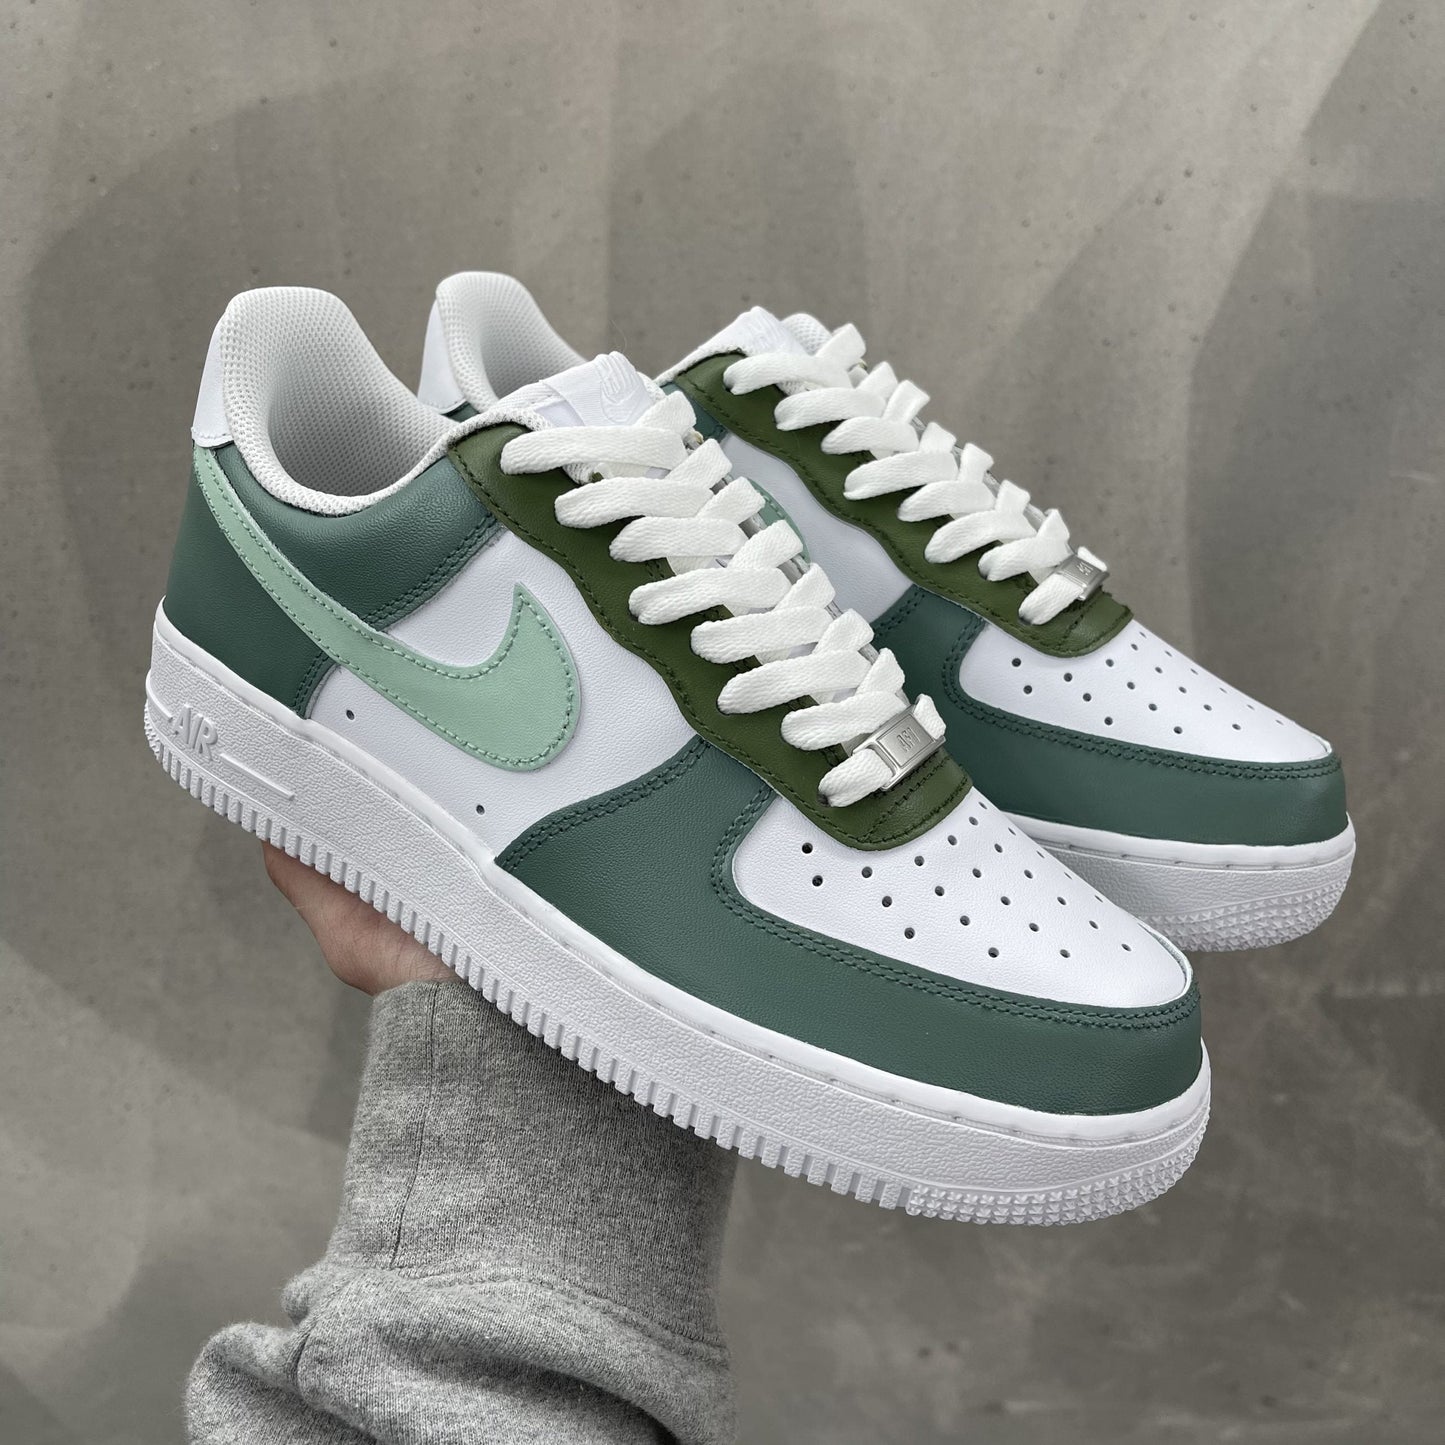 Custom AIR FORCE 1 - Forest vibe